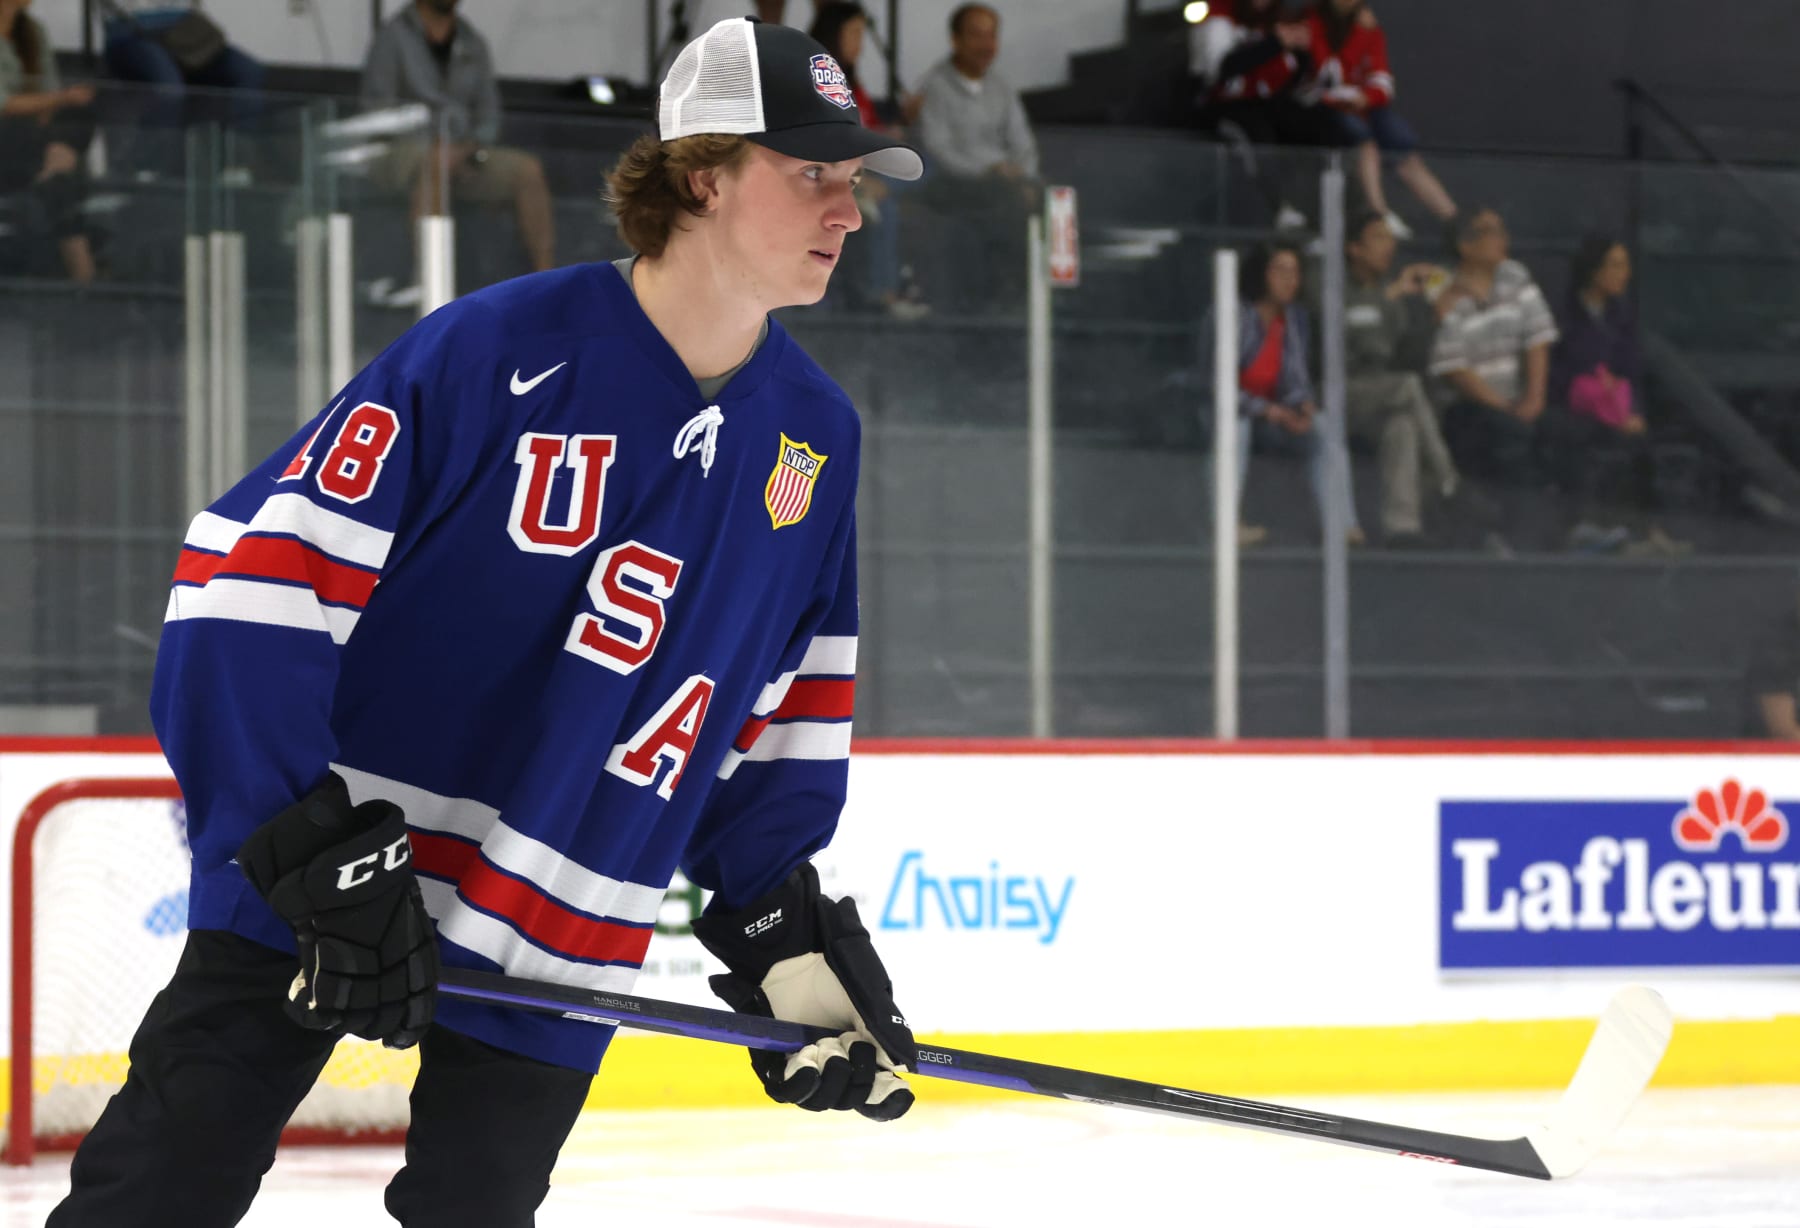 Review of Anaheim Ducks prospects at the World Junior